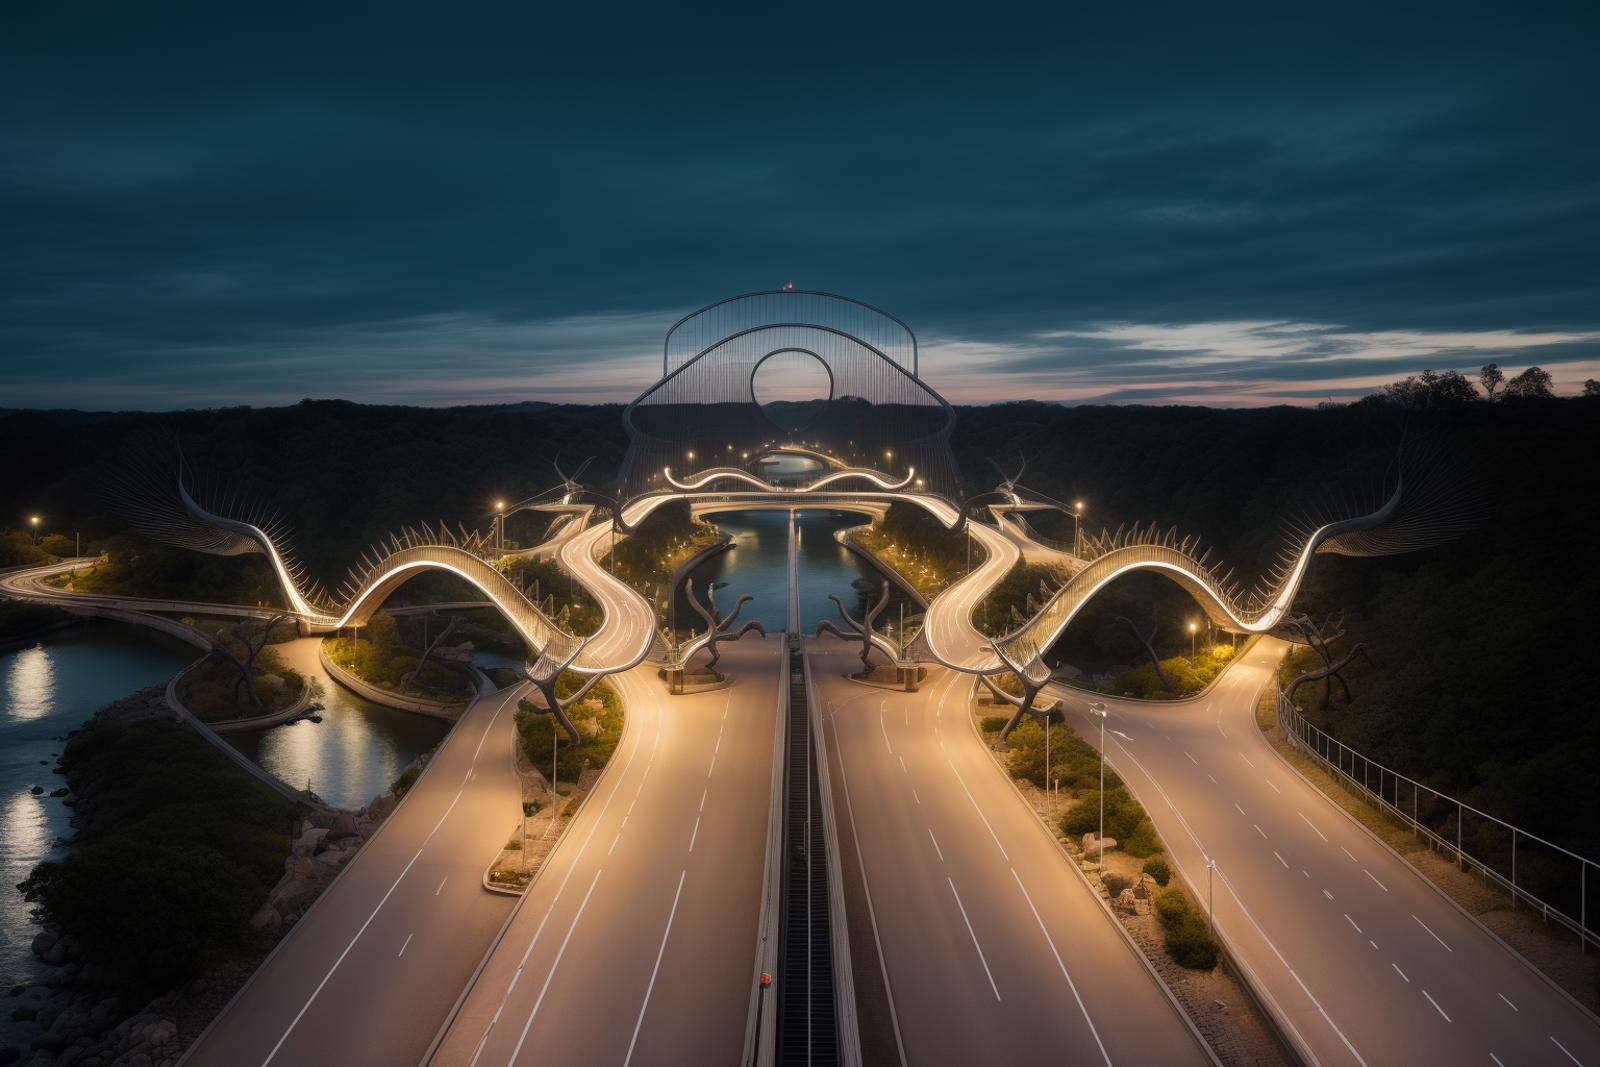 A bridge with a double helix design at night.